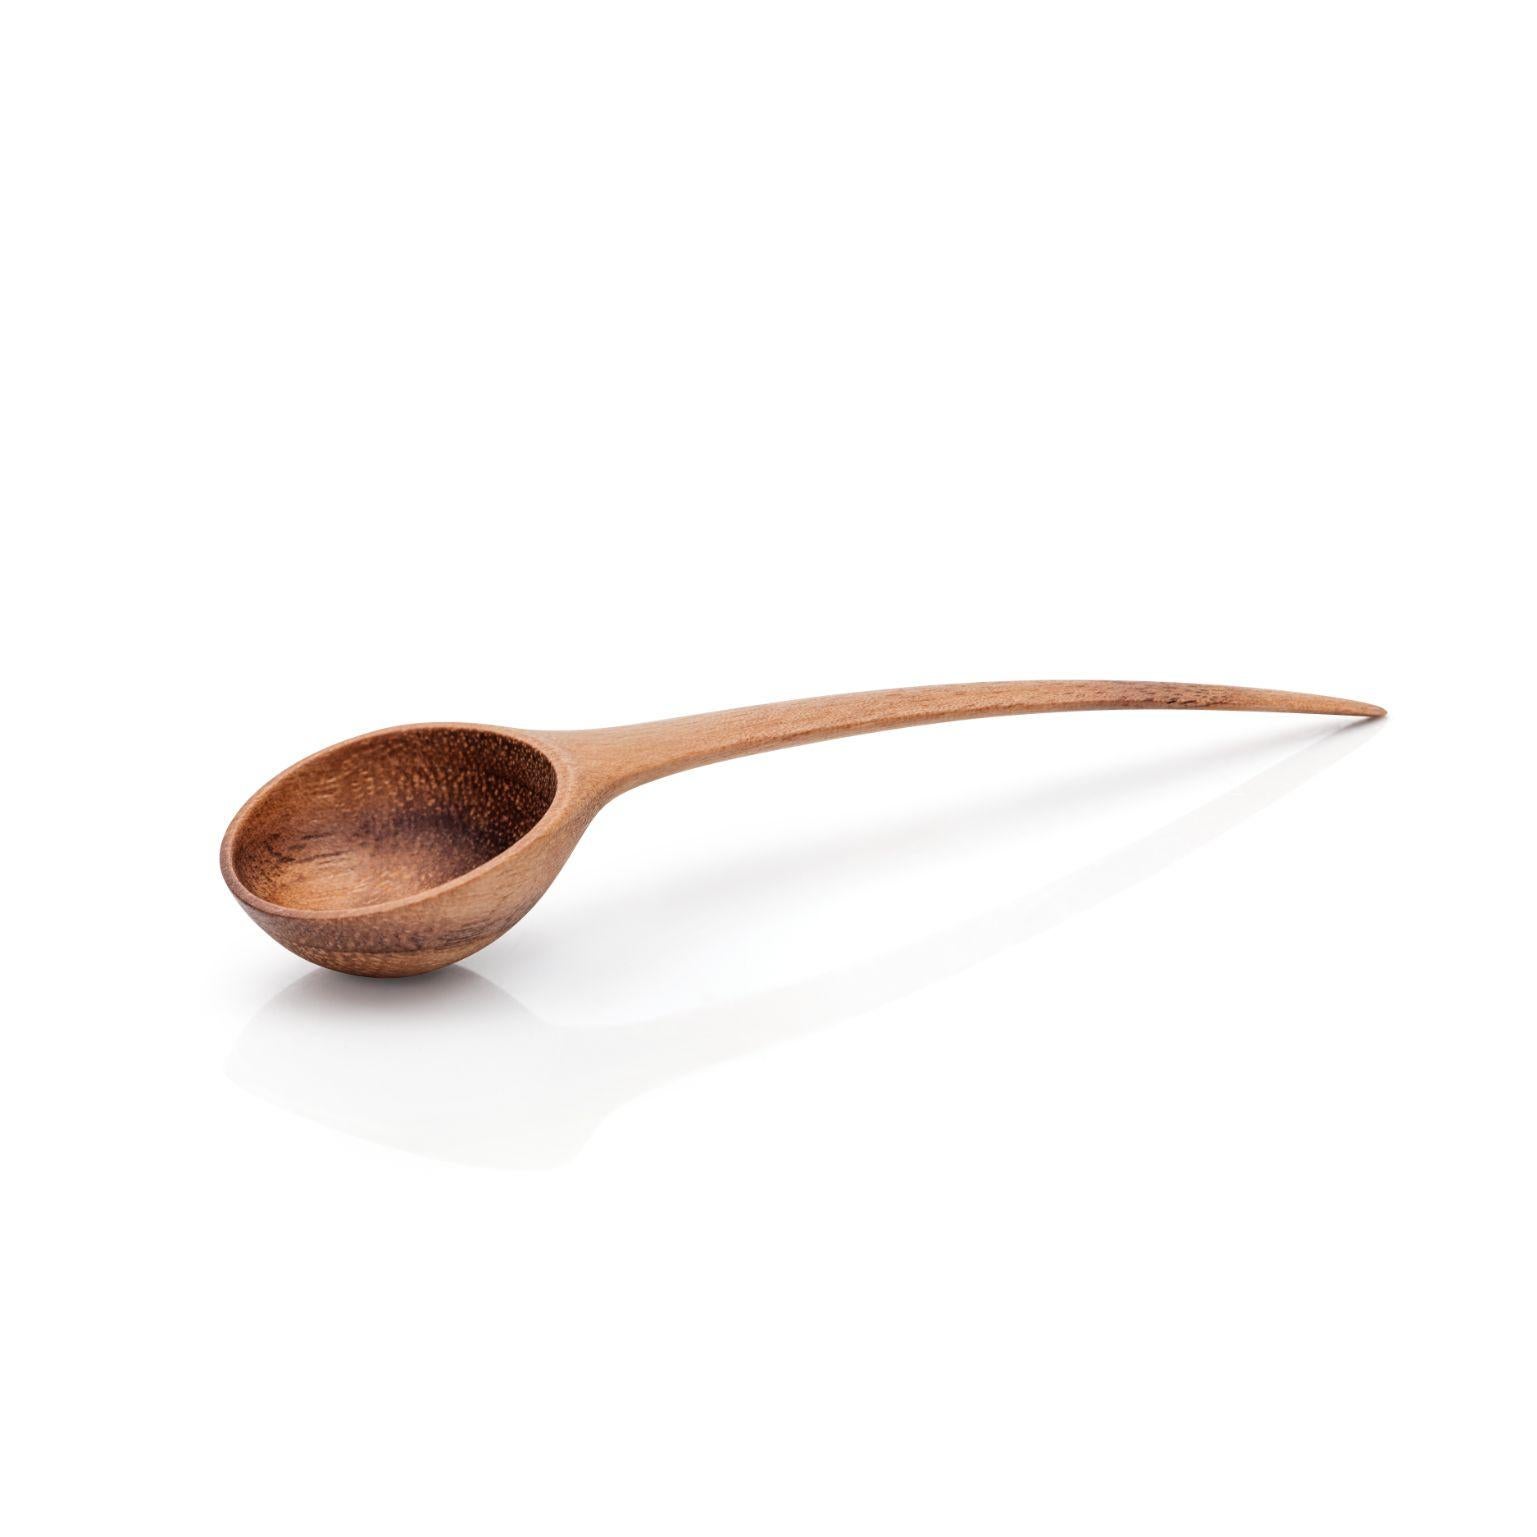 Pisara spoon - Large by Antrei Hartikainen
Materials: Walnut, maple, natural oil wax
Dimensions: W 7-10 cm

Also available in three sizes and a variety of woods

This range of small spoons are ideal for serving sugar, salt and other